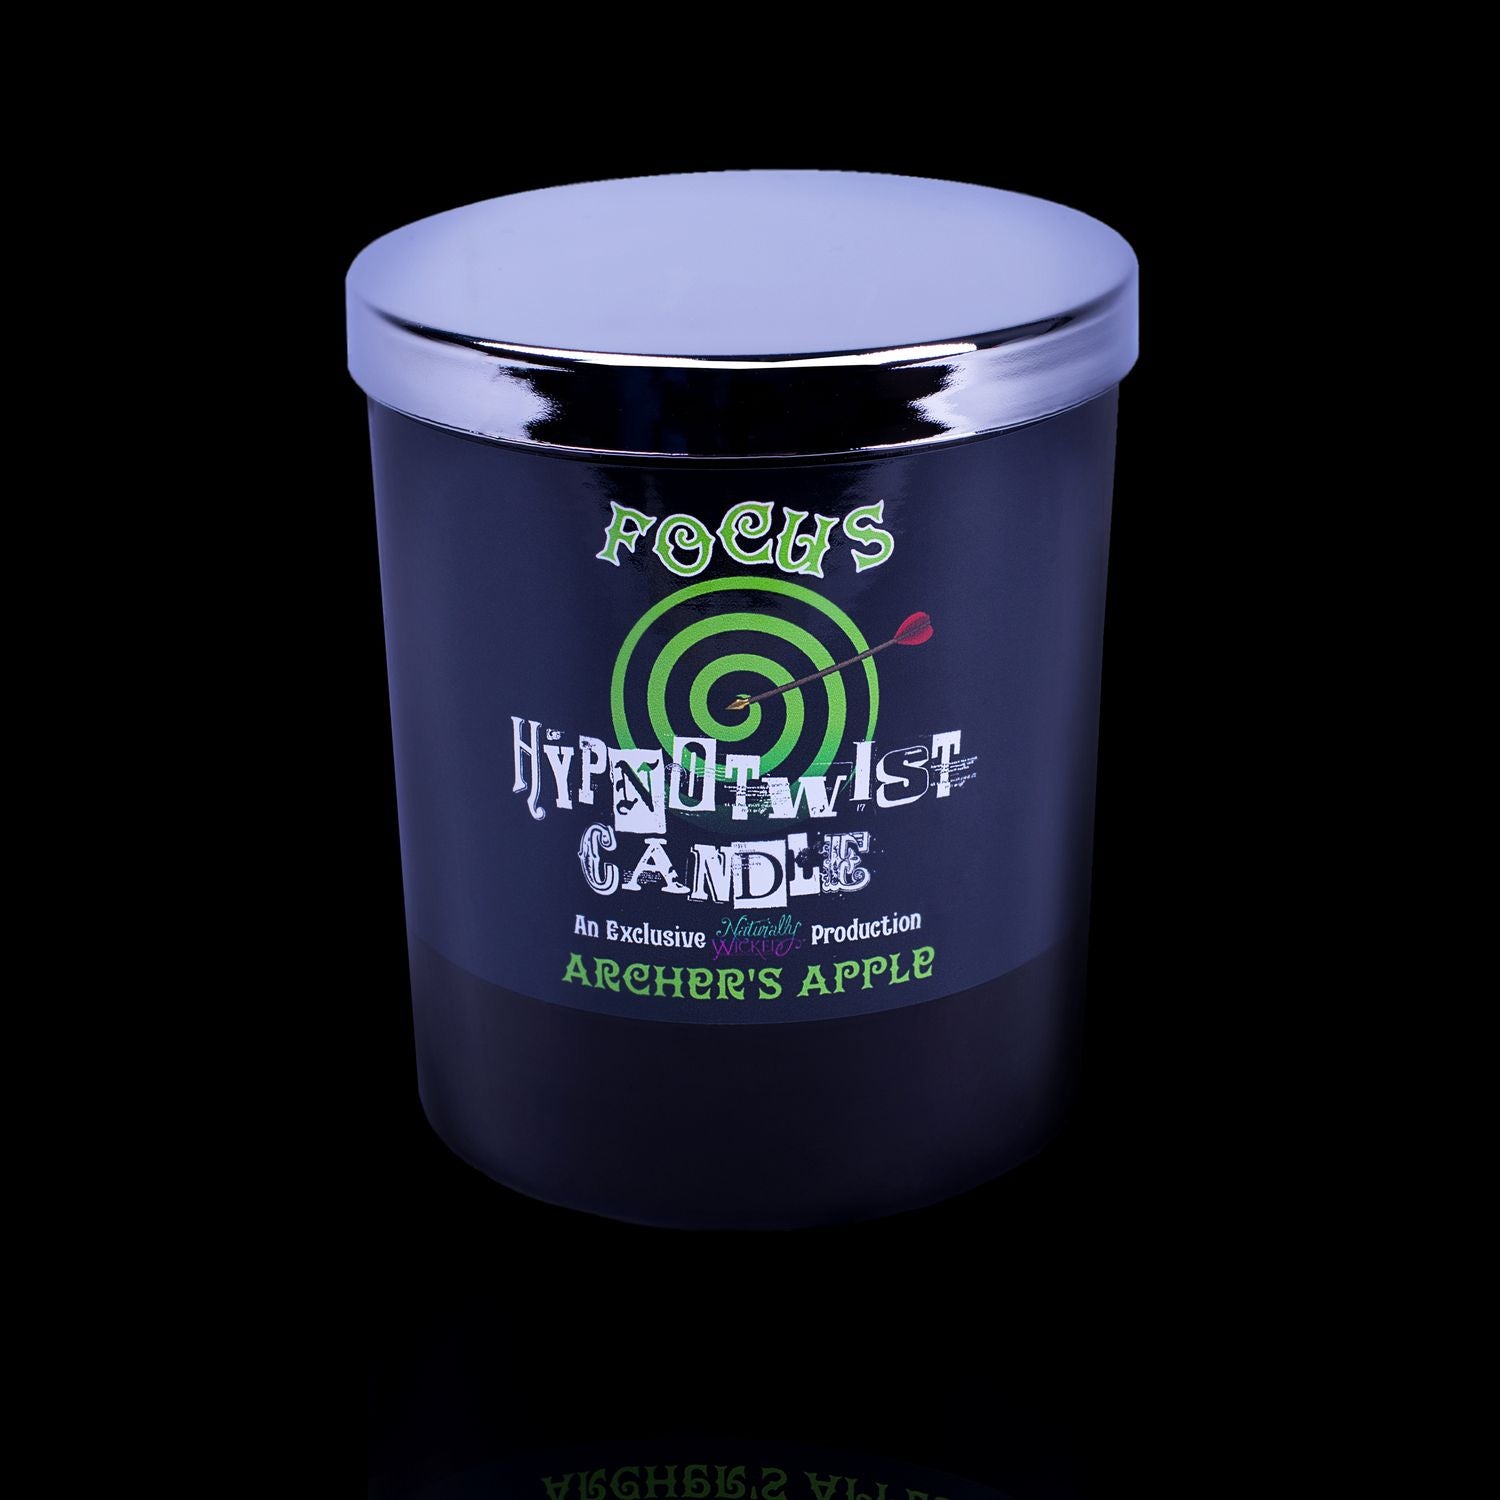 Perfect Your Focus With The Naturally Wicked Hypnotwist Focus Candle Featuring Plant-based Soy Green Wax Scented With Archer's Apple & Includes A Green Aventurine Crystal Spinning Top & Mirrored Lid